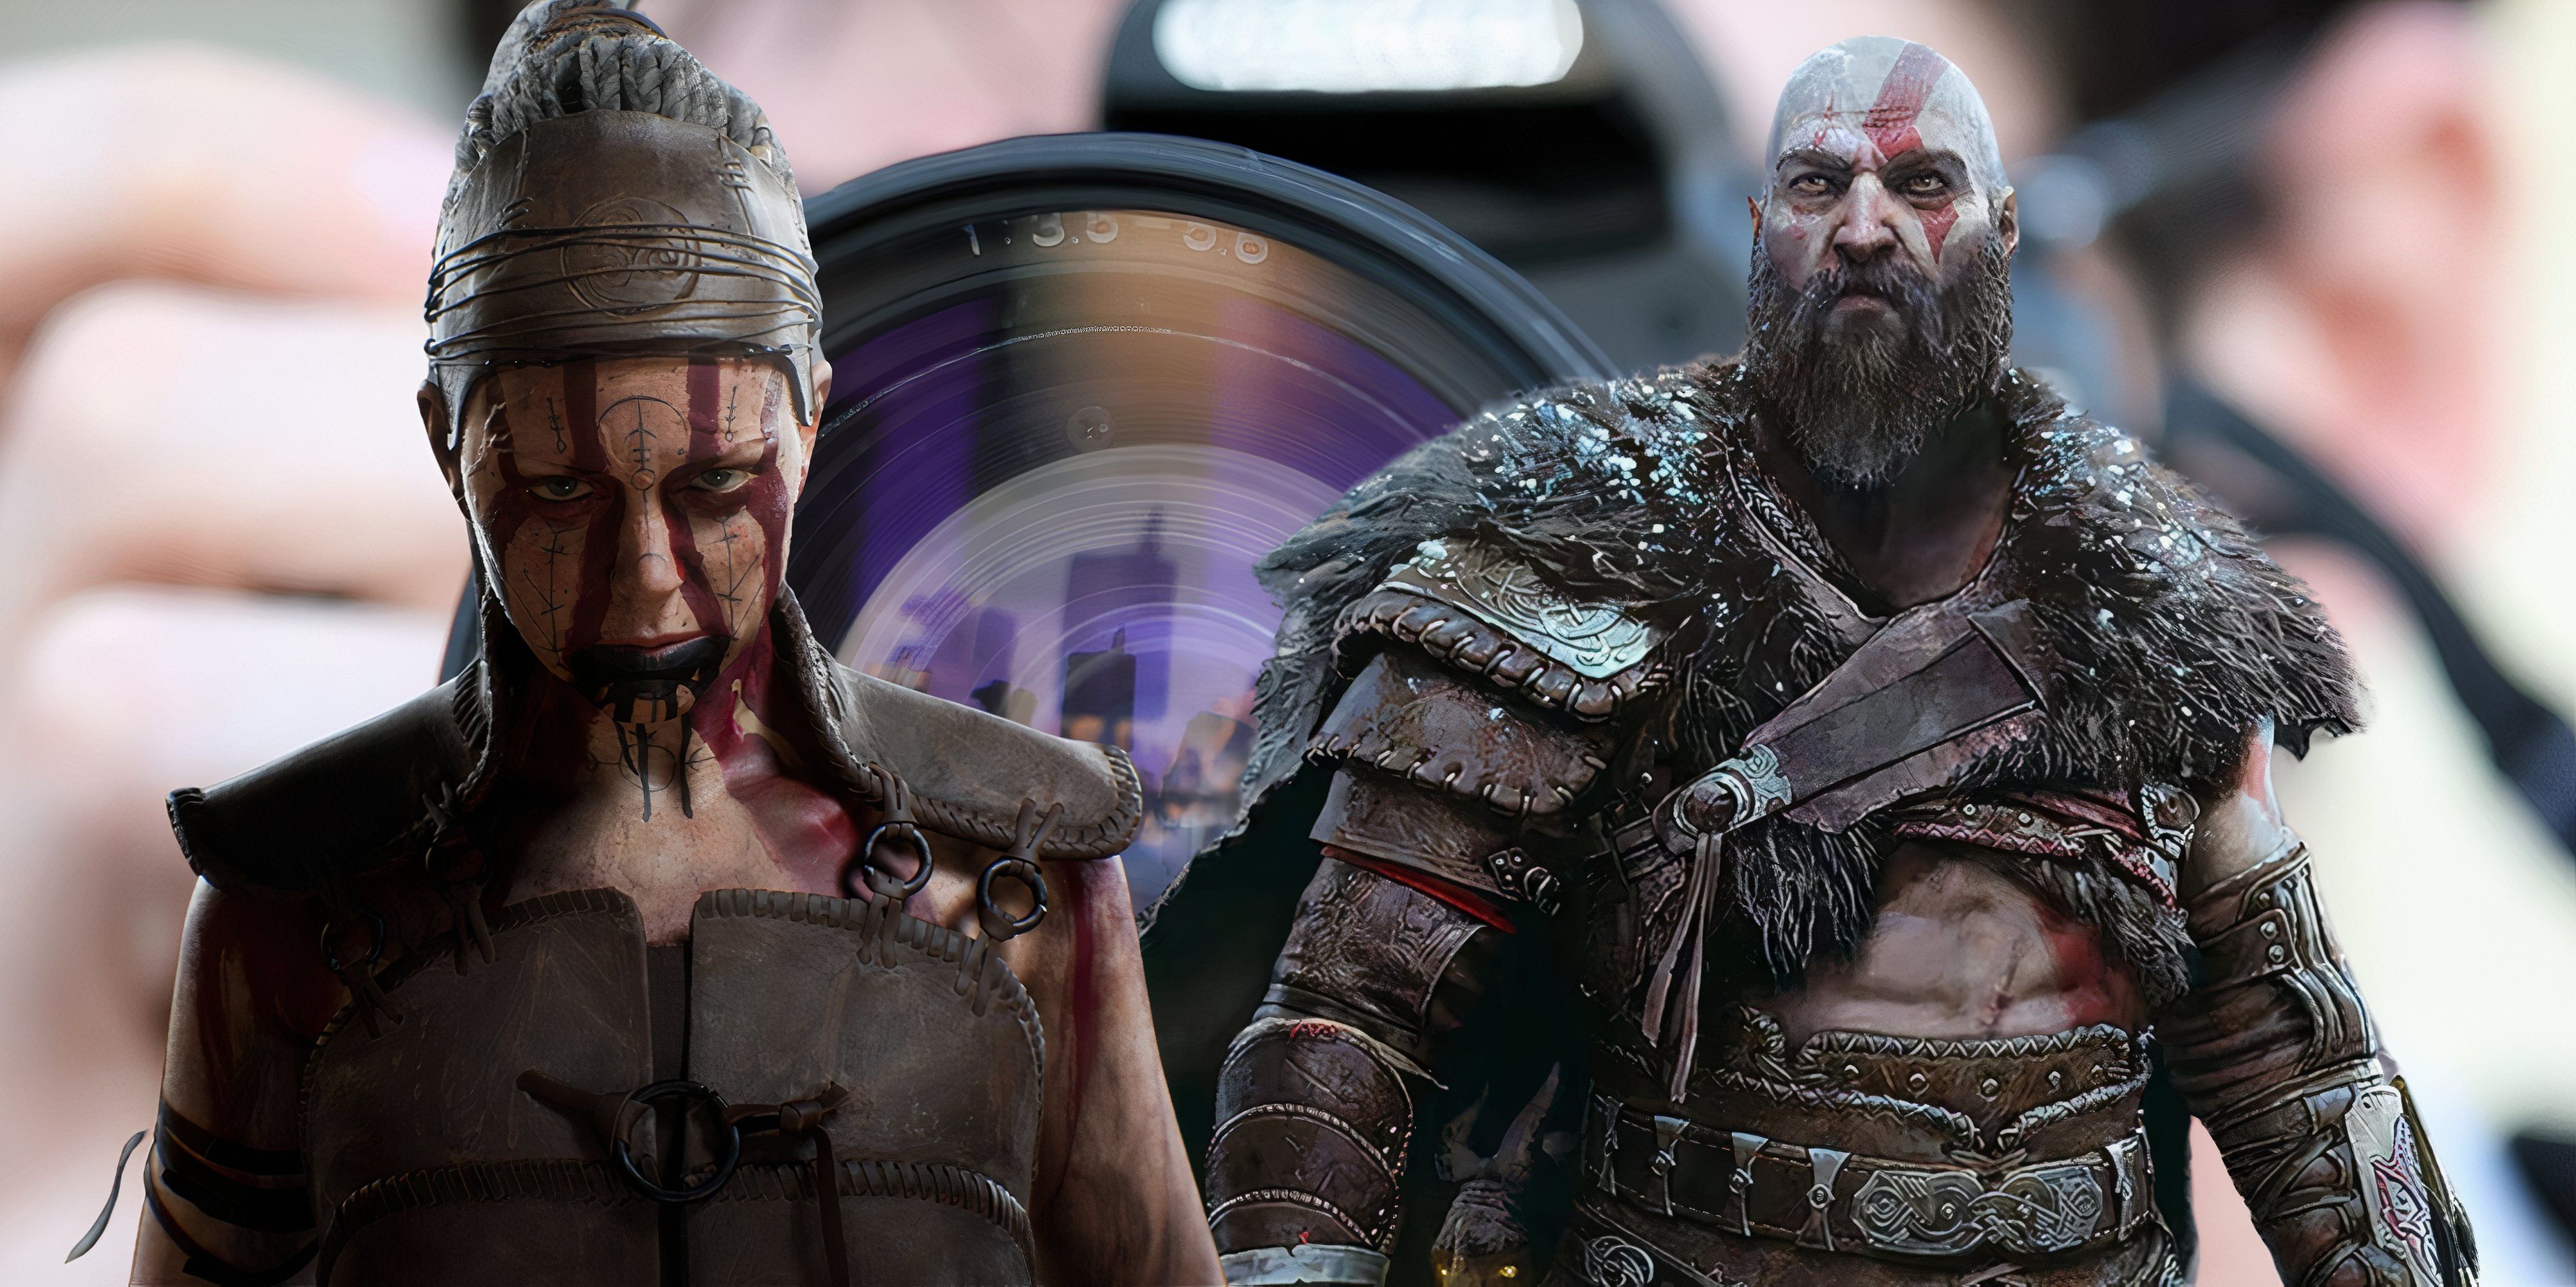 Senua and Kratos in front of a camera